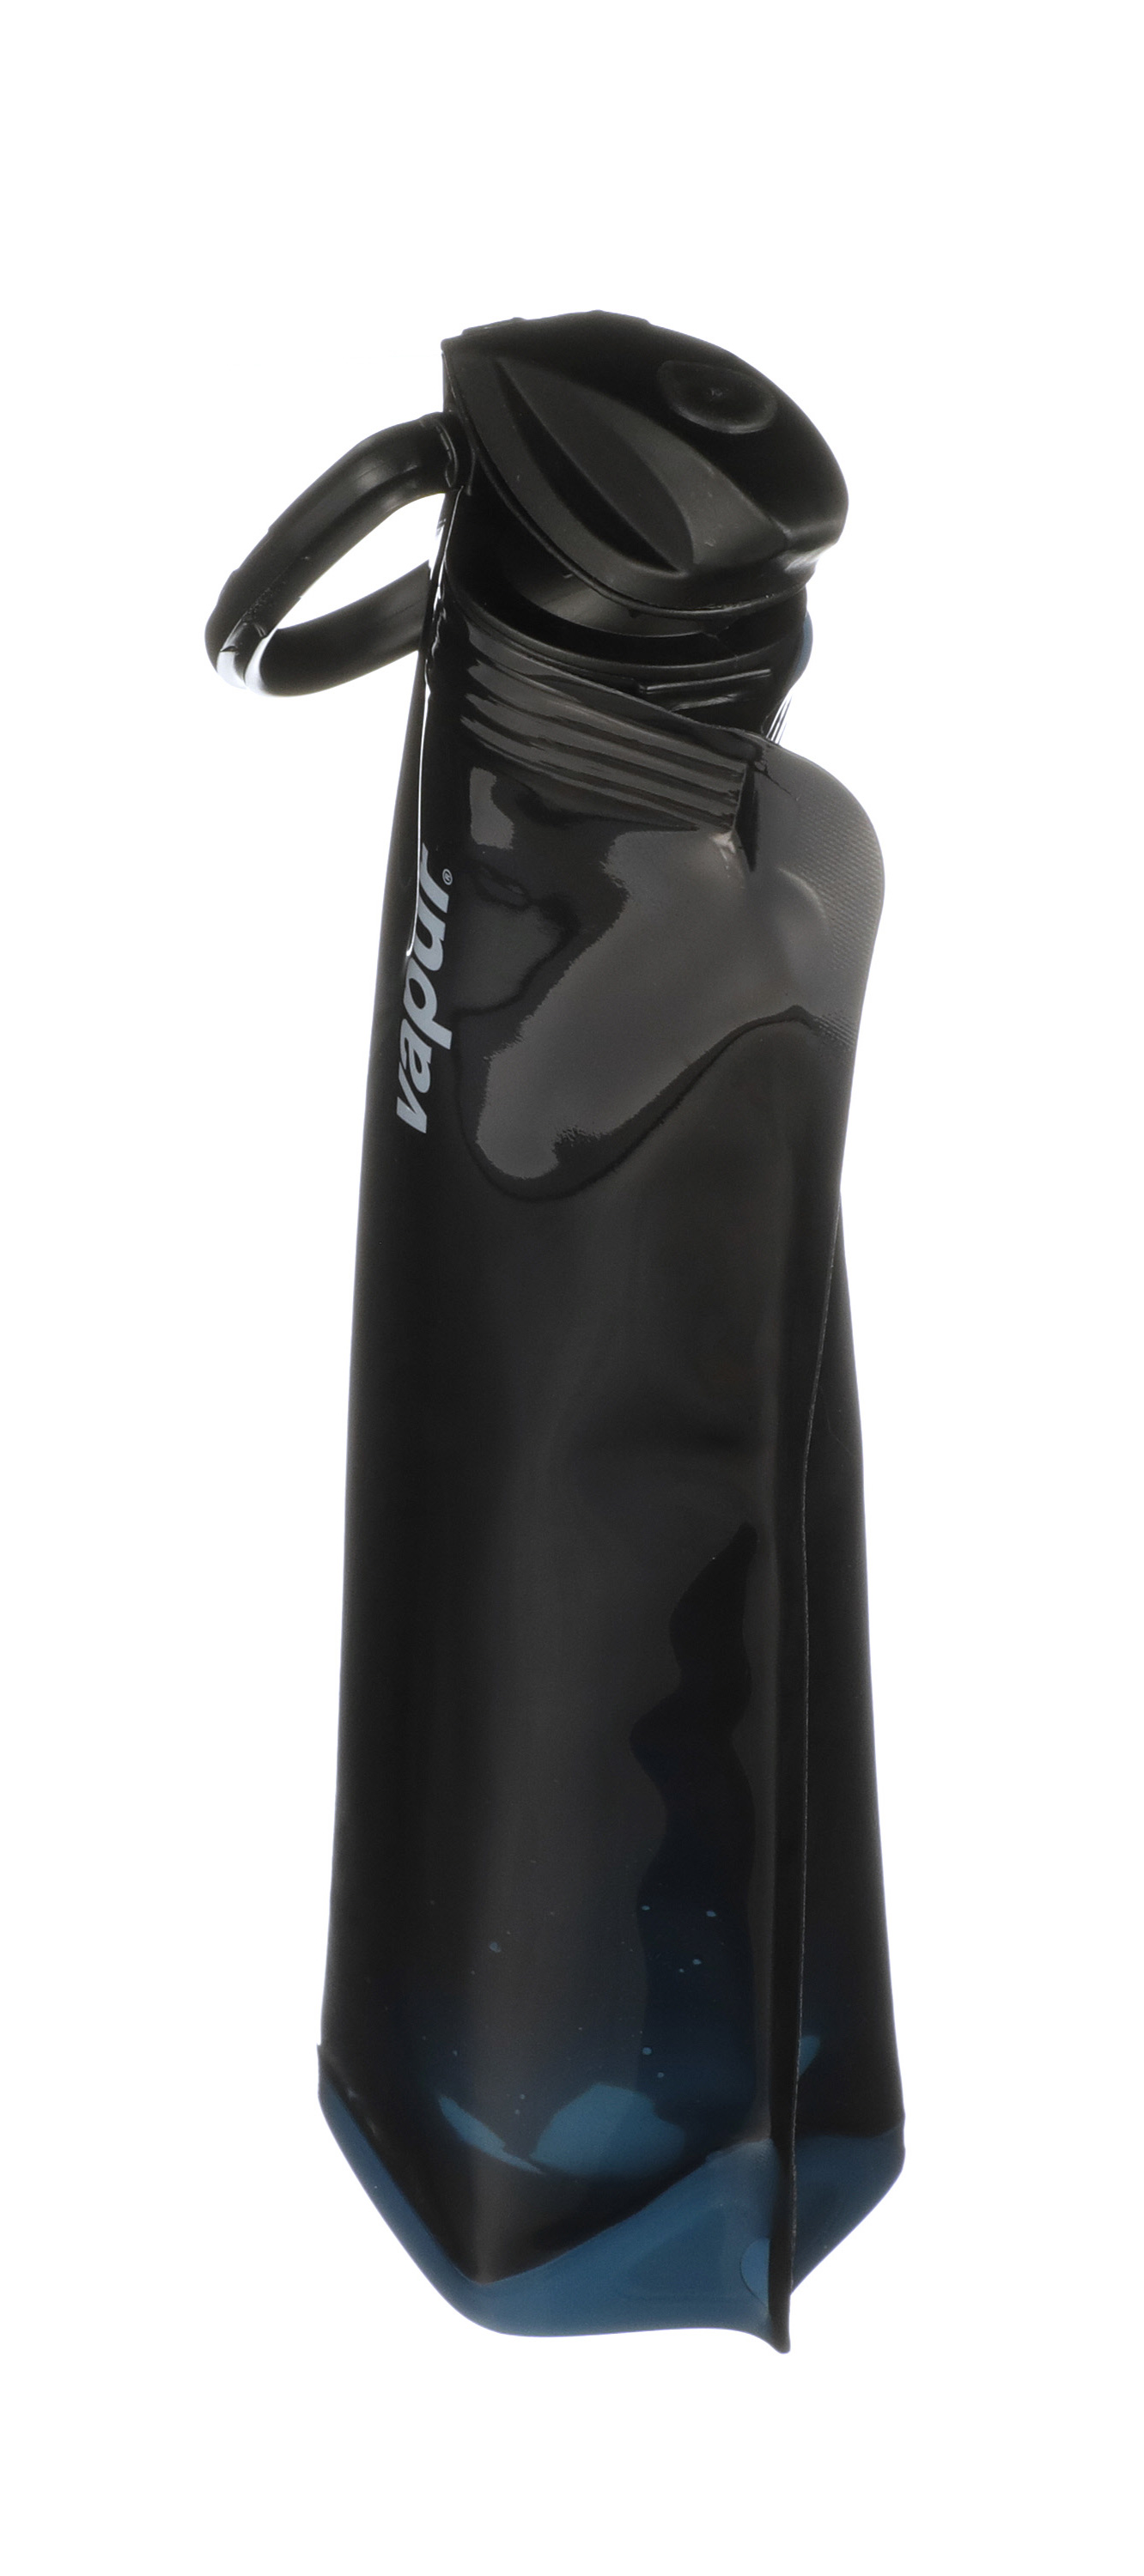 Vapur .7 Liter Wide Mouth Collapsible Water Bottle – Flashpacker Co